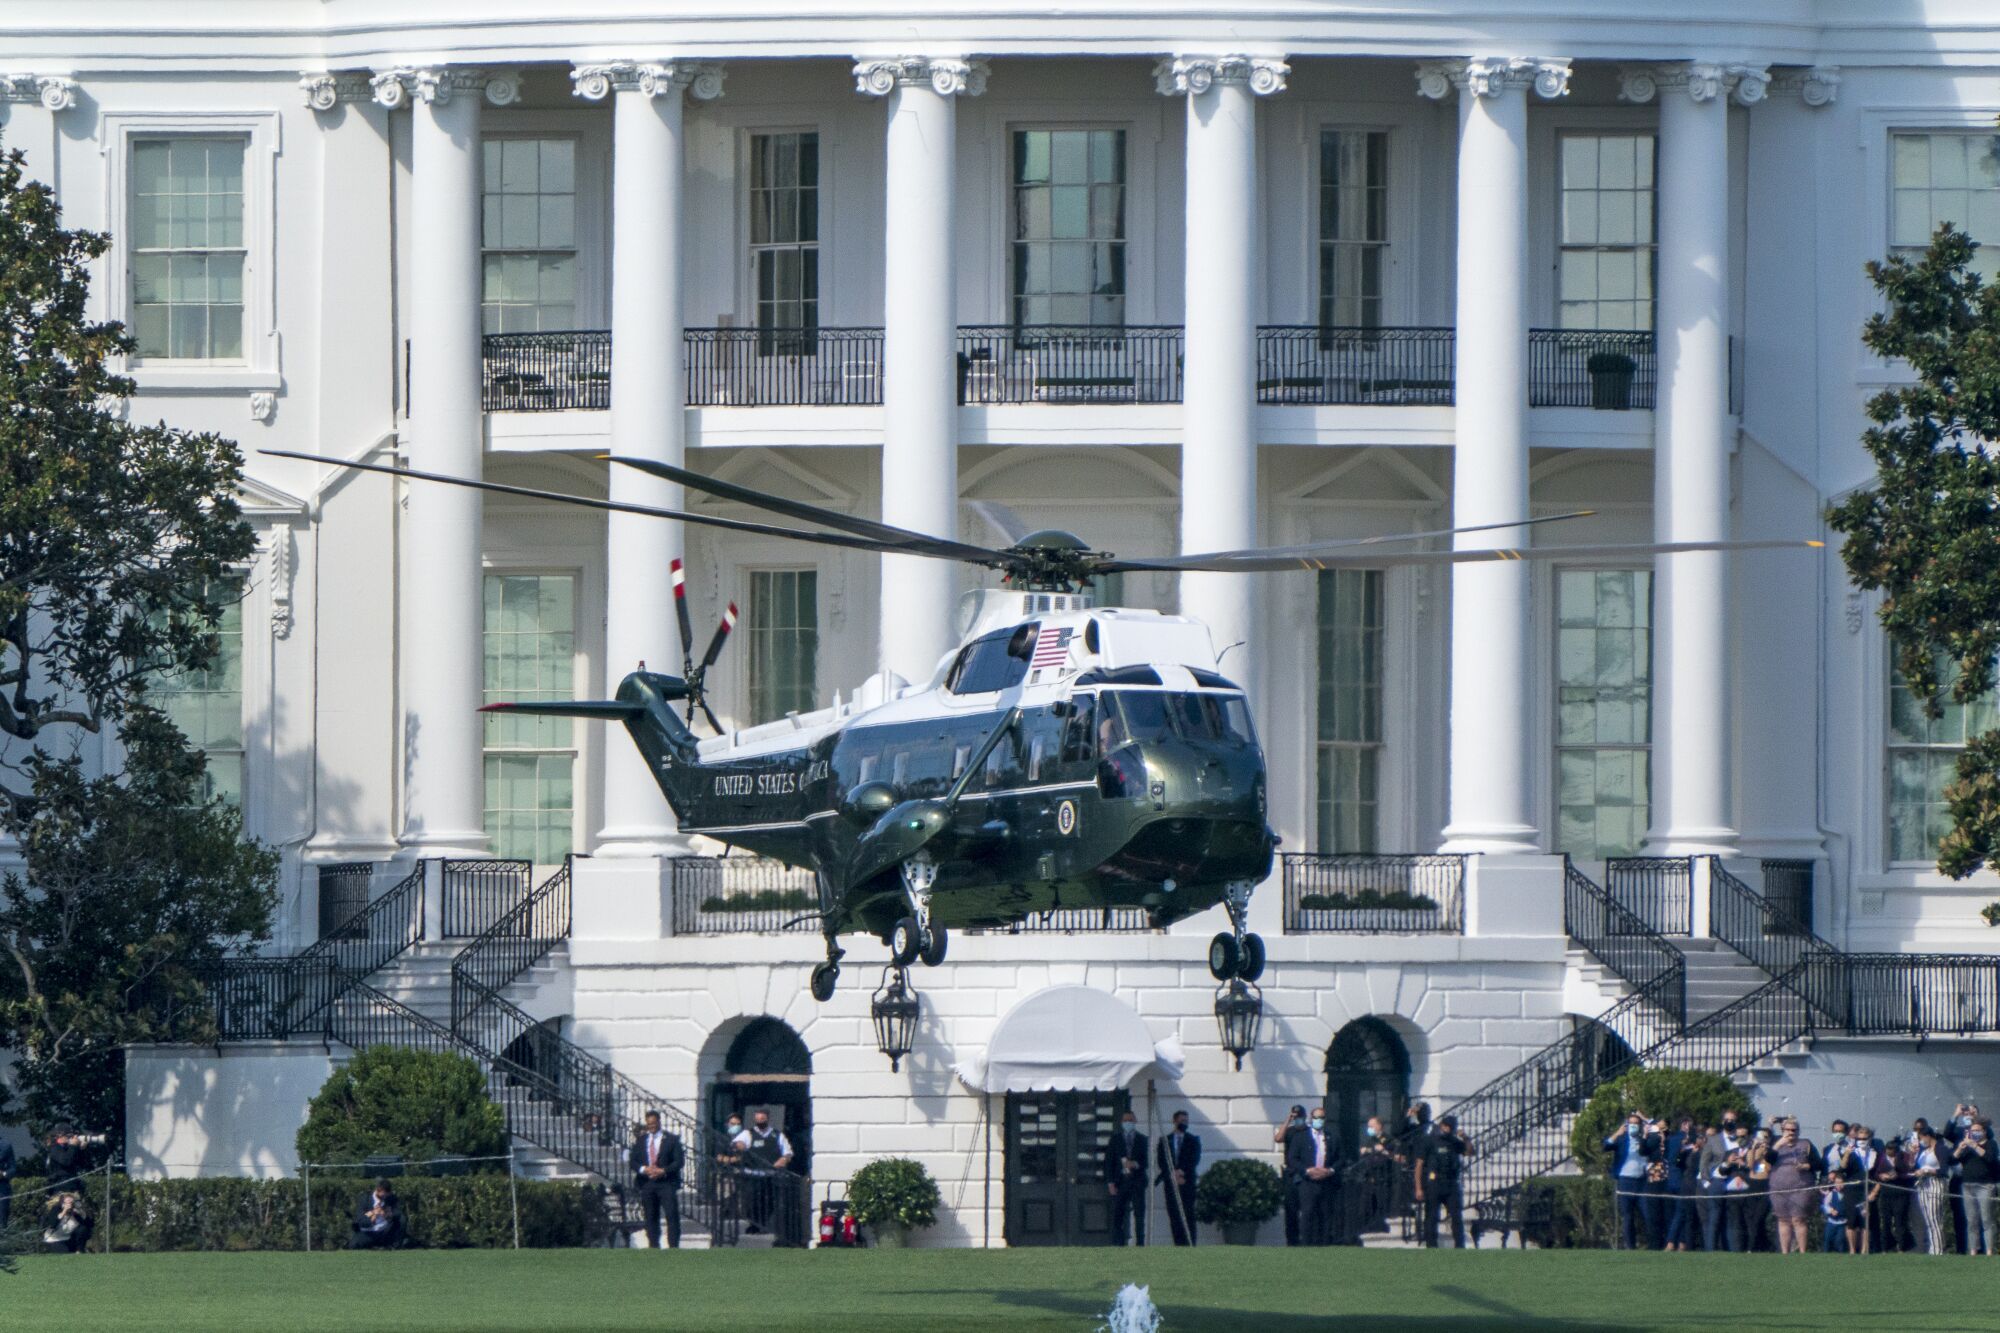 Marine One lifts off from the White House as President Trump 